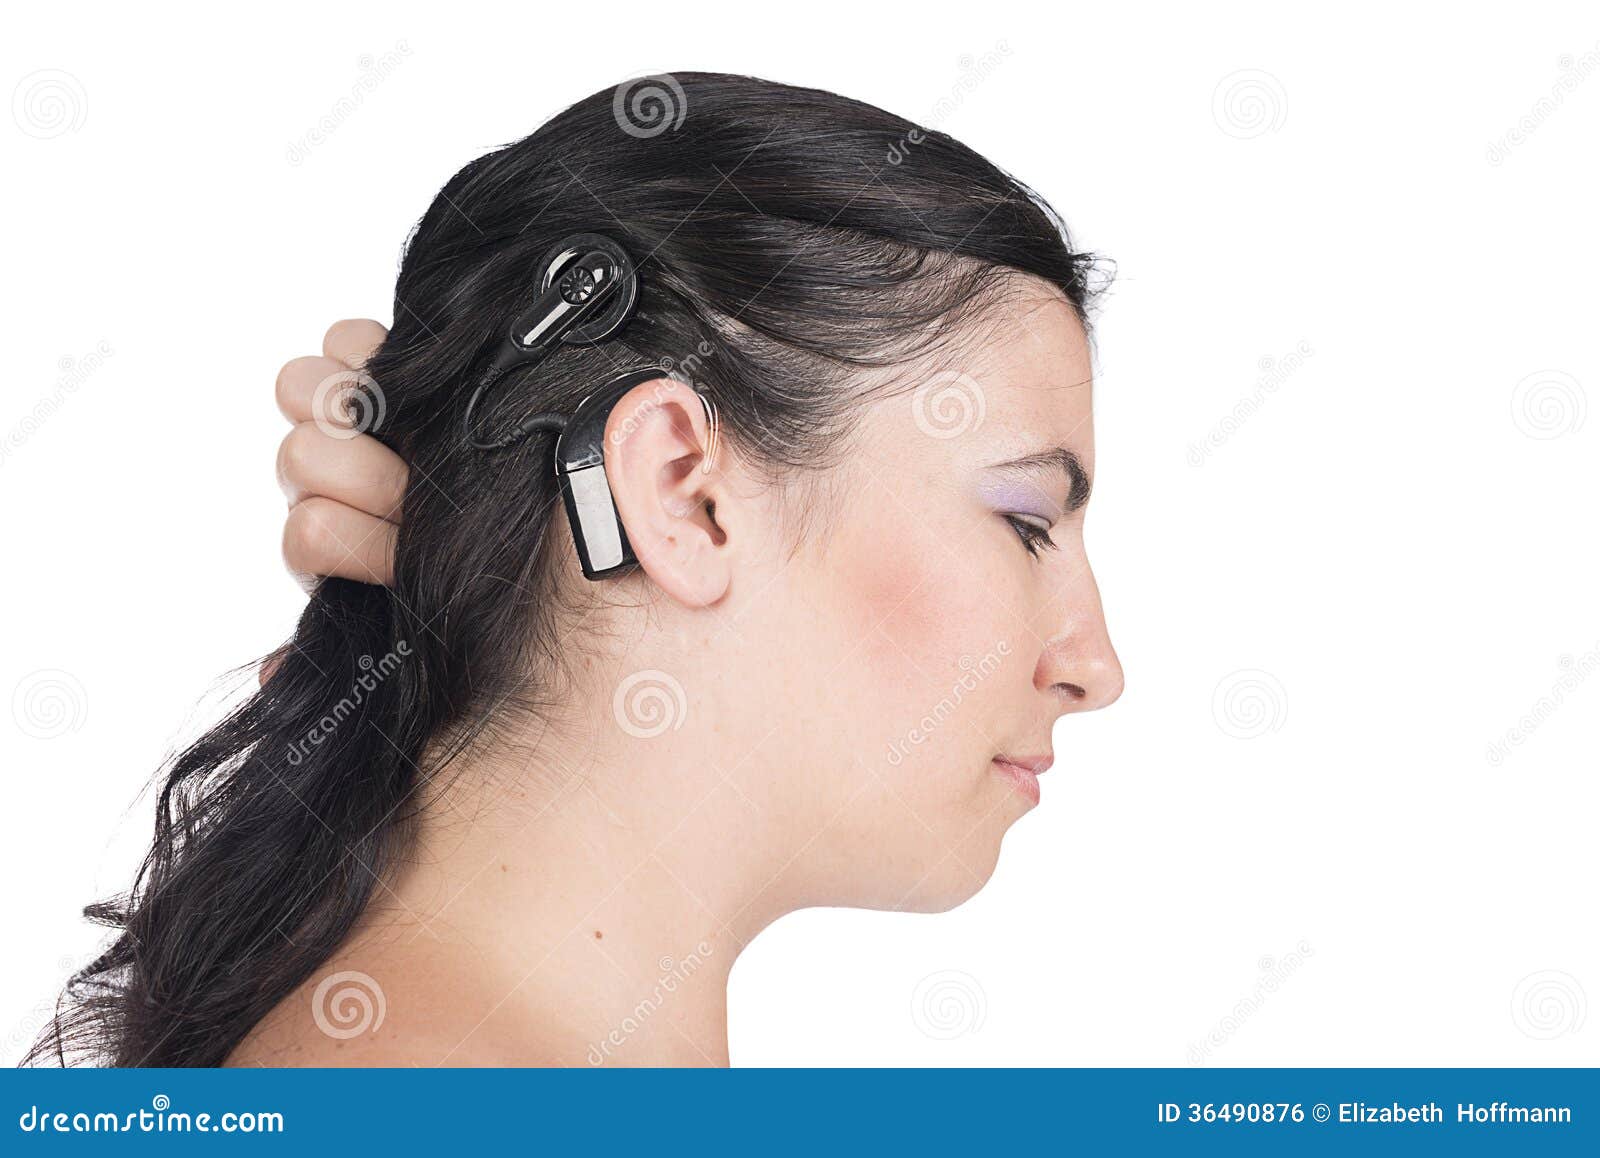 young deaf or hearing impaired woman with cochlear implant